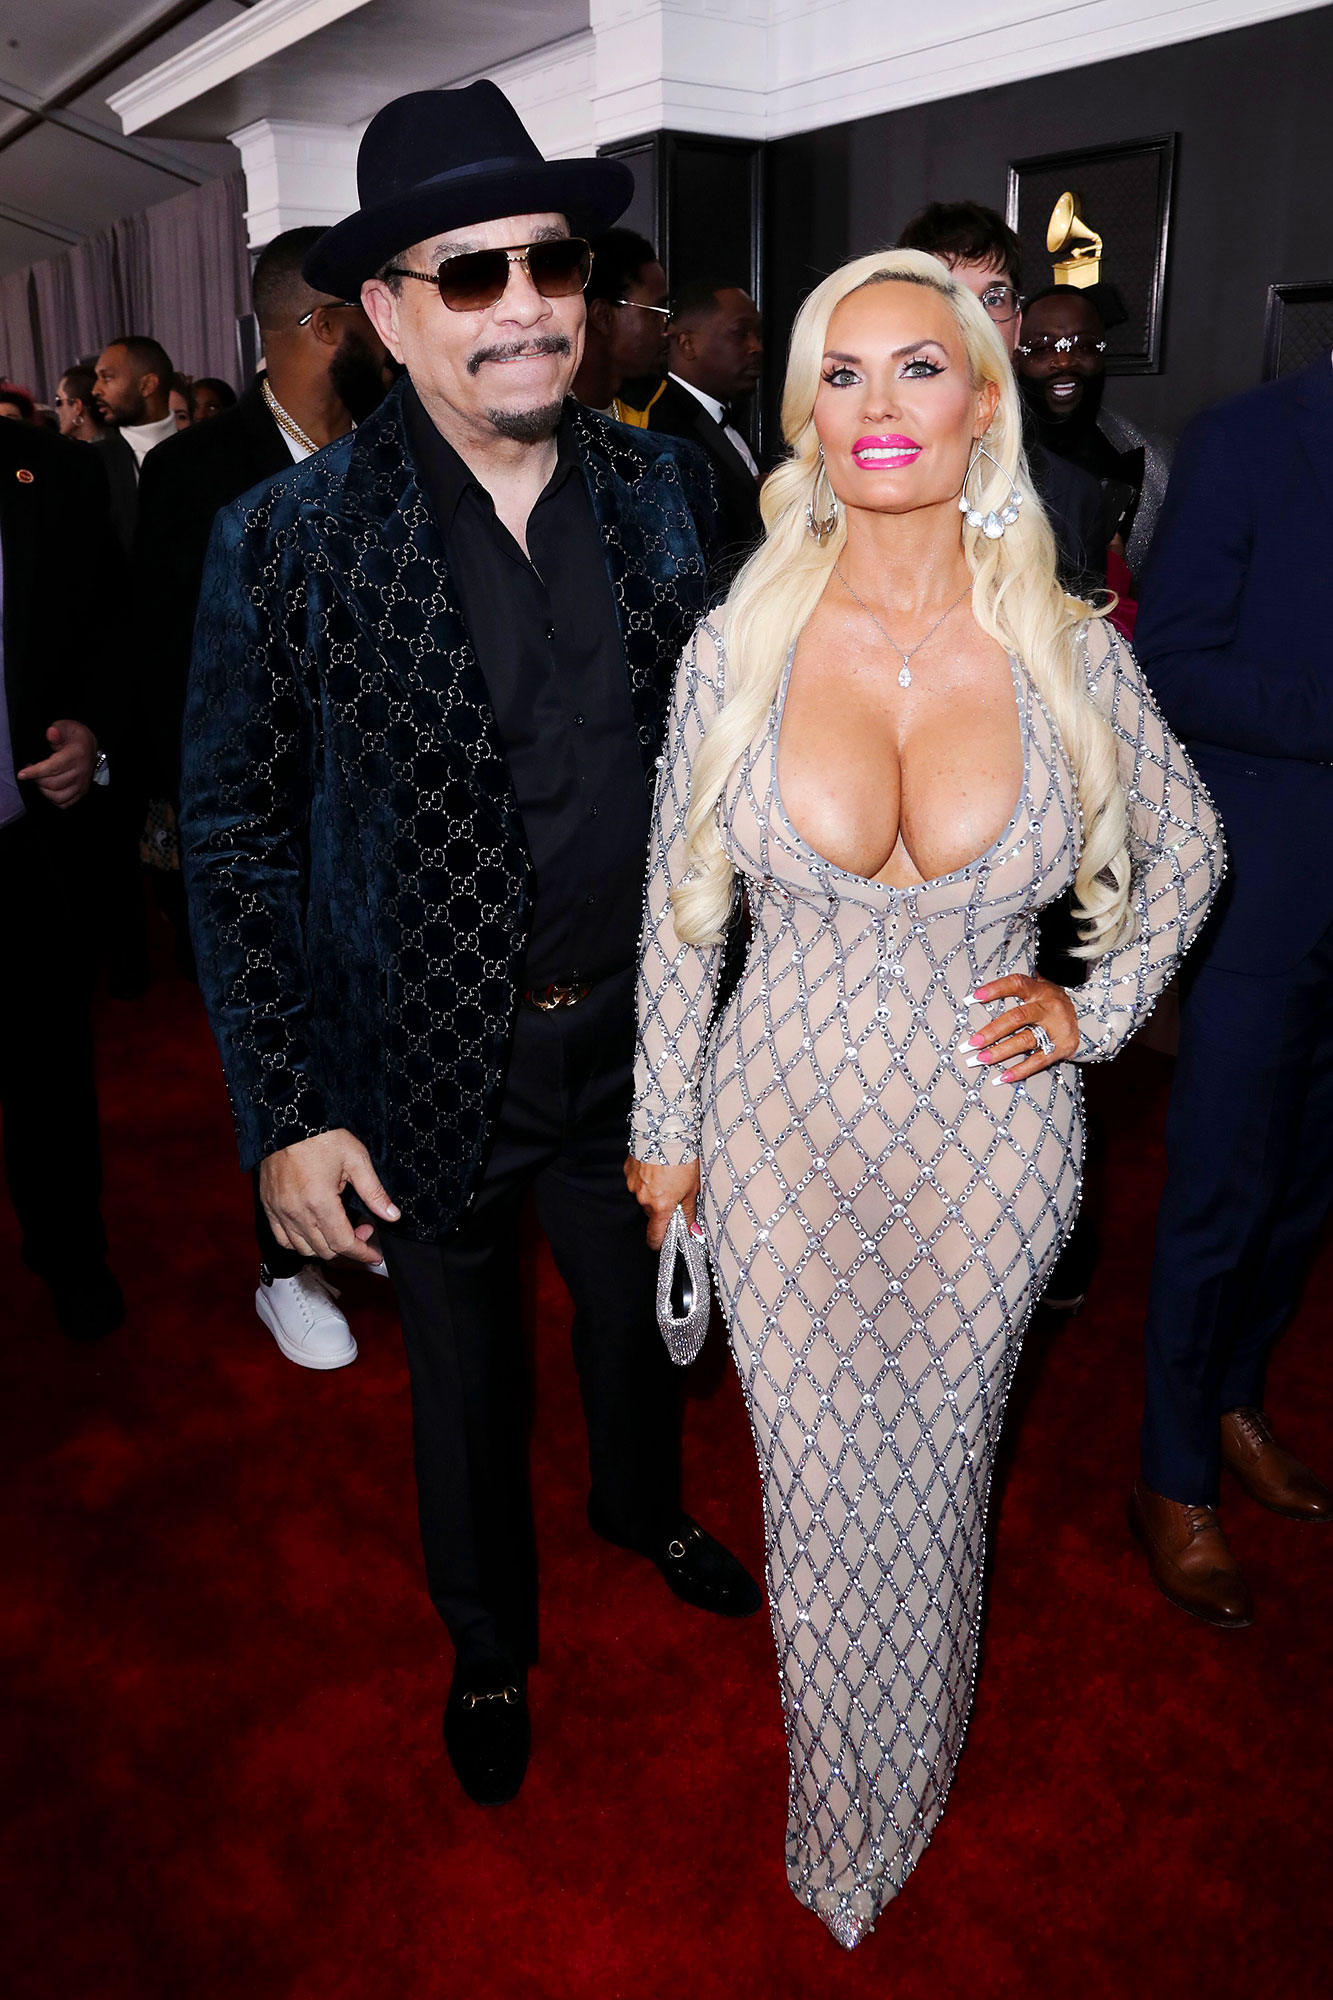 Ice-T Slams Troll Over Claims Coco Austins Dress Was Too Small pic